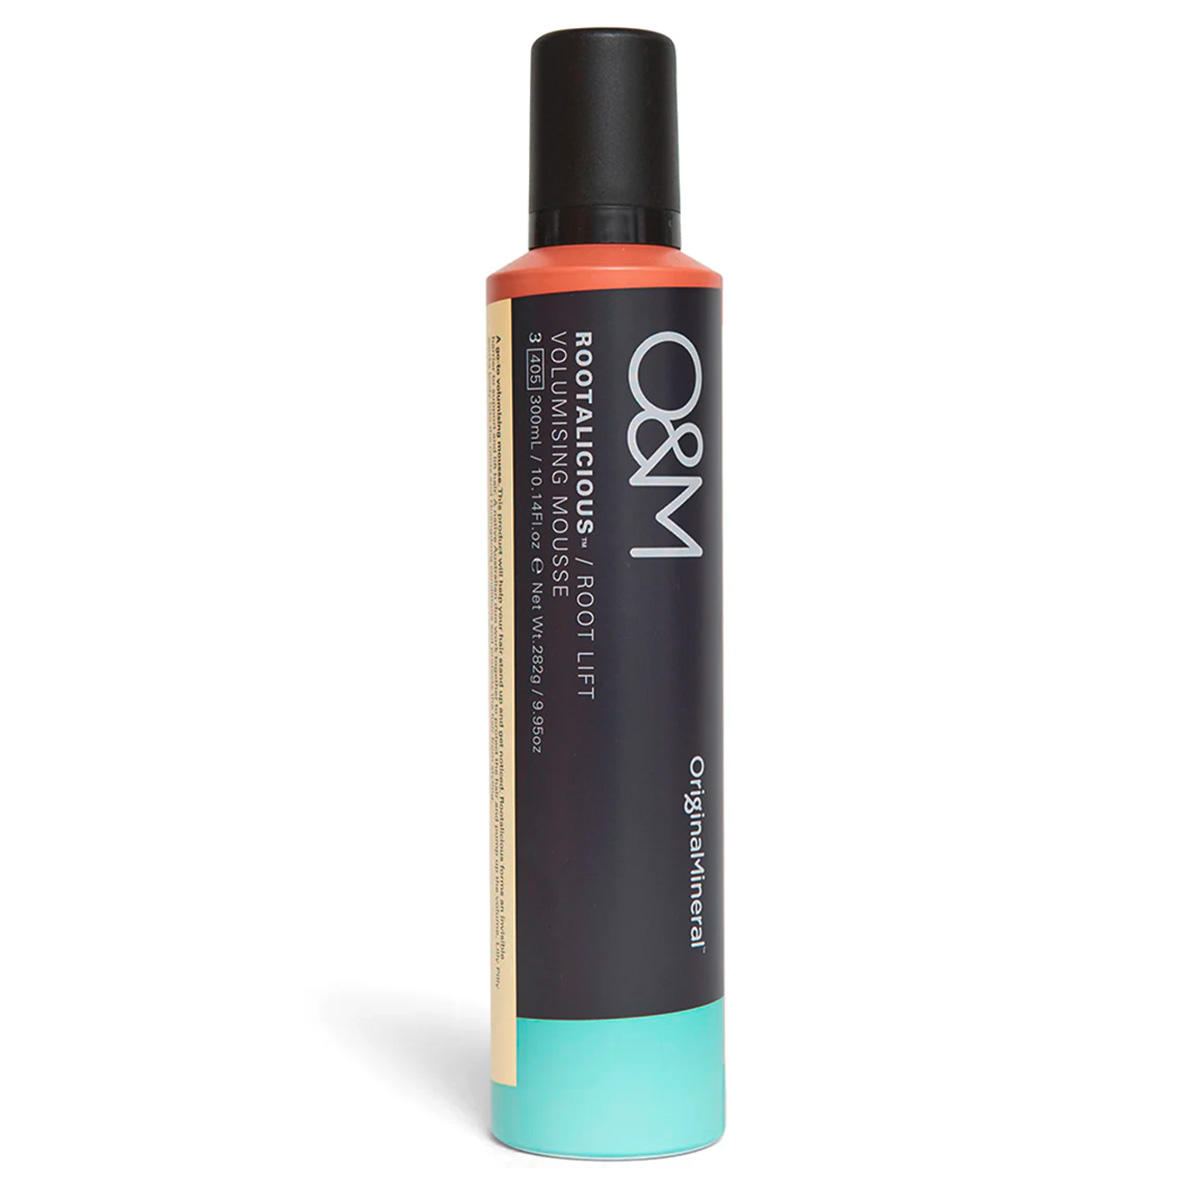 O&M Rootalicious 300 ml - 1